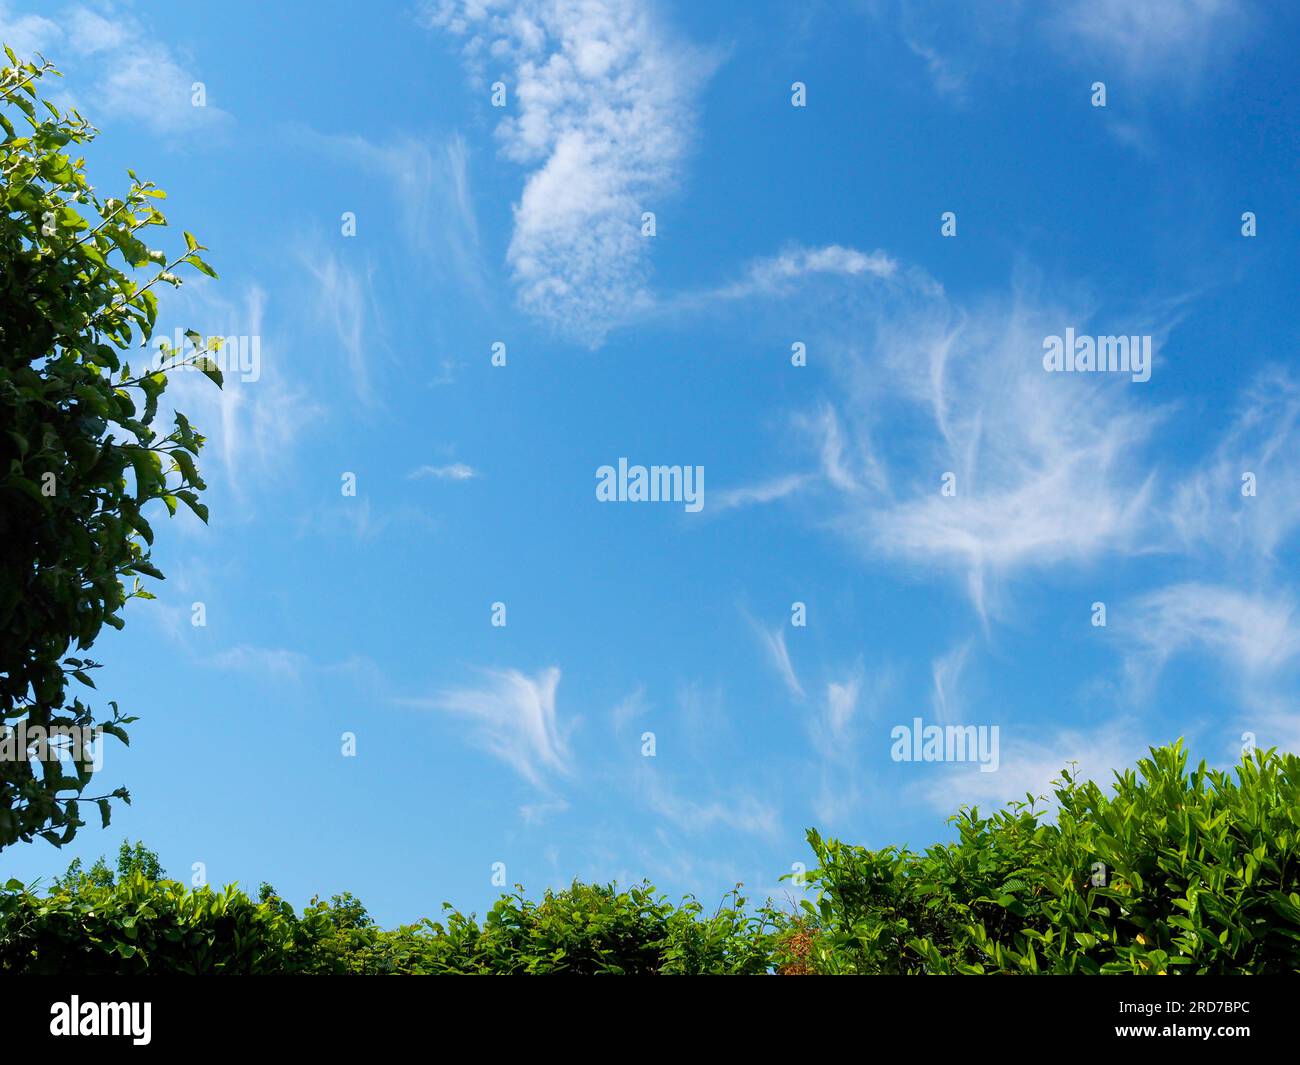 Tree and hedge with white clouds on a blue sky Stock Photo